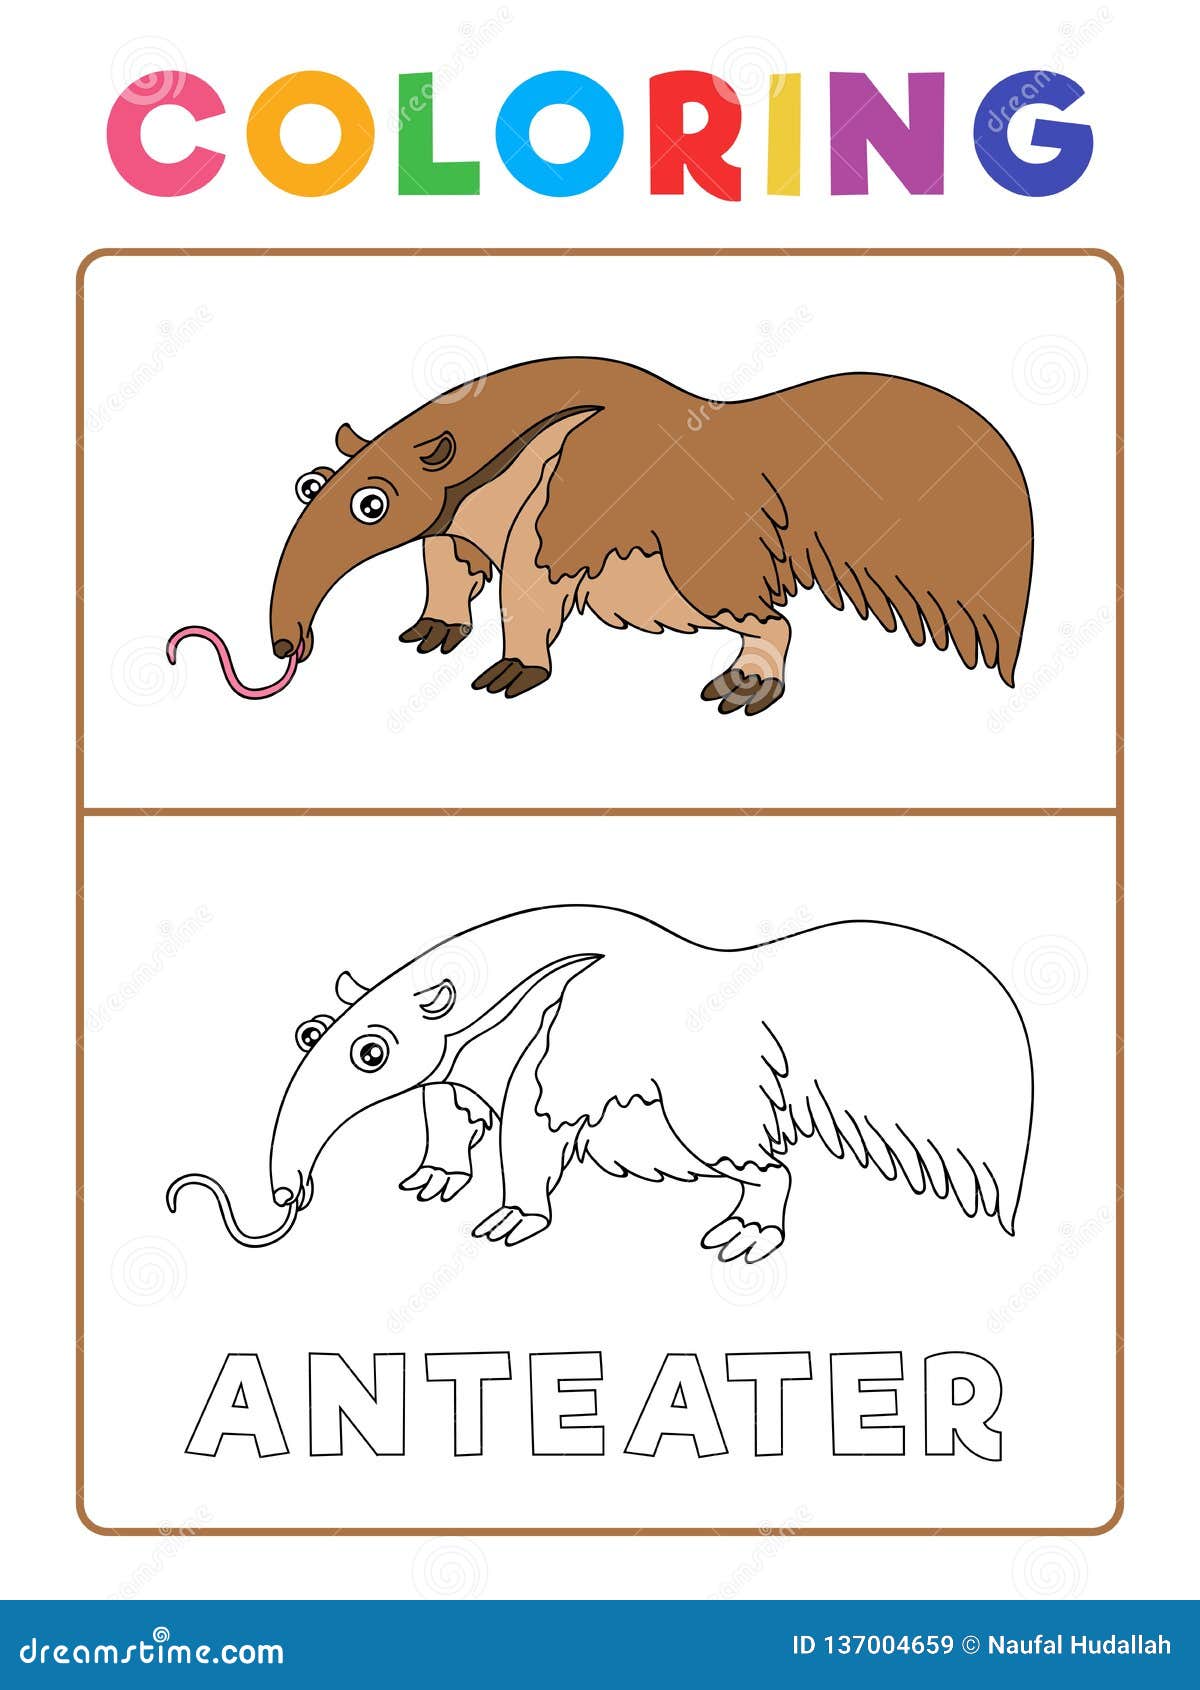 Anteater coloring stock illustrations â anteater coloring stock illustrations vectors clipart